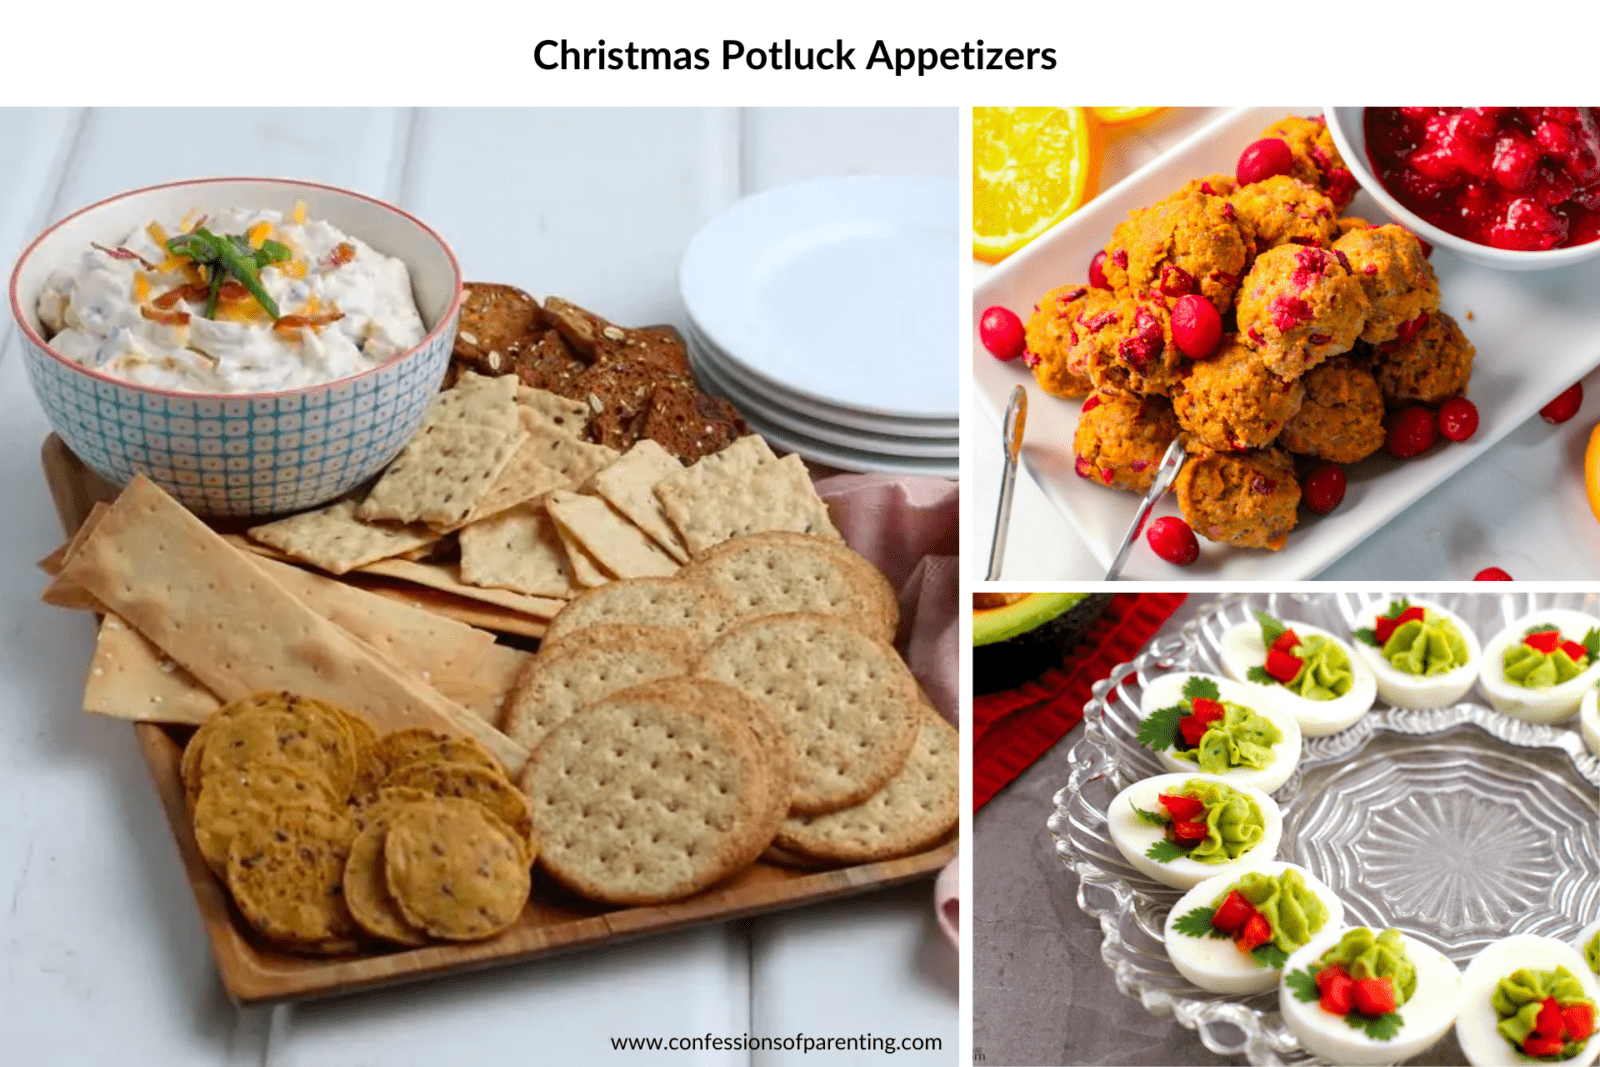 Christmas Potluck Appetizers